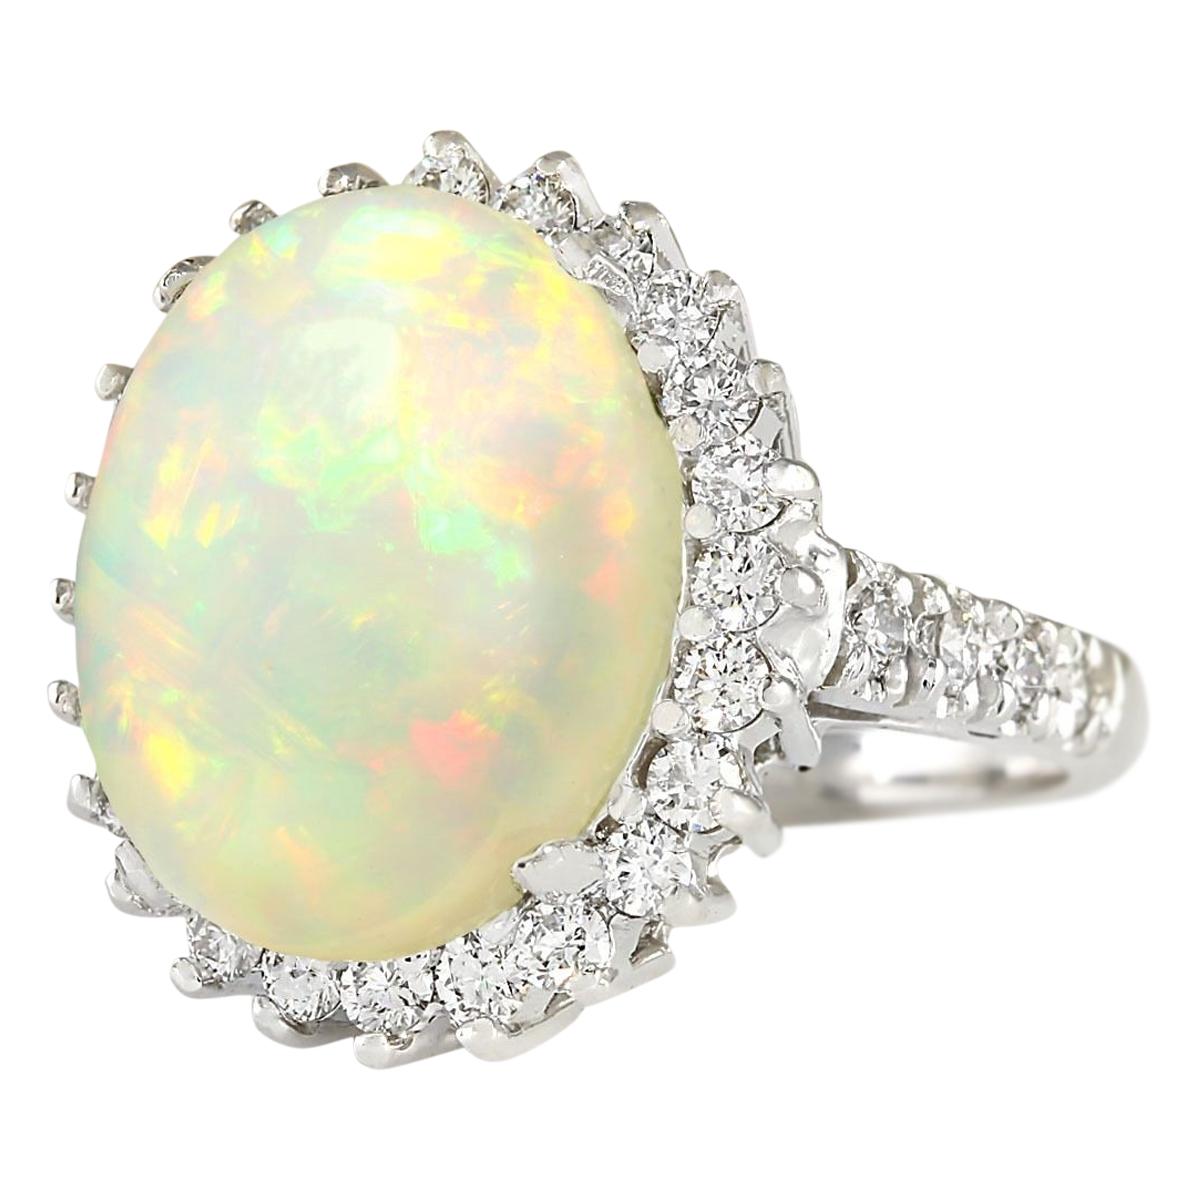 Stamped: 14K White Gold
Total Ring Weight: 8.5 Grams
Opal Weight is 8.19 Carat (Measures: 16.00x12.00 mm)
Diamond Weight is 1.10 Carat
Color: F-G, Clarity: VS2-SI1
Face Measures: 20.35x18.00 mm
Sku: [704242W]